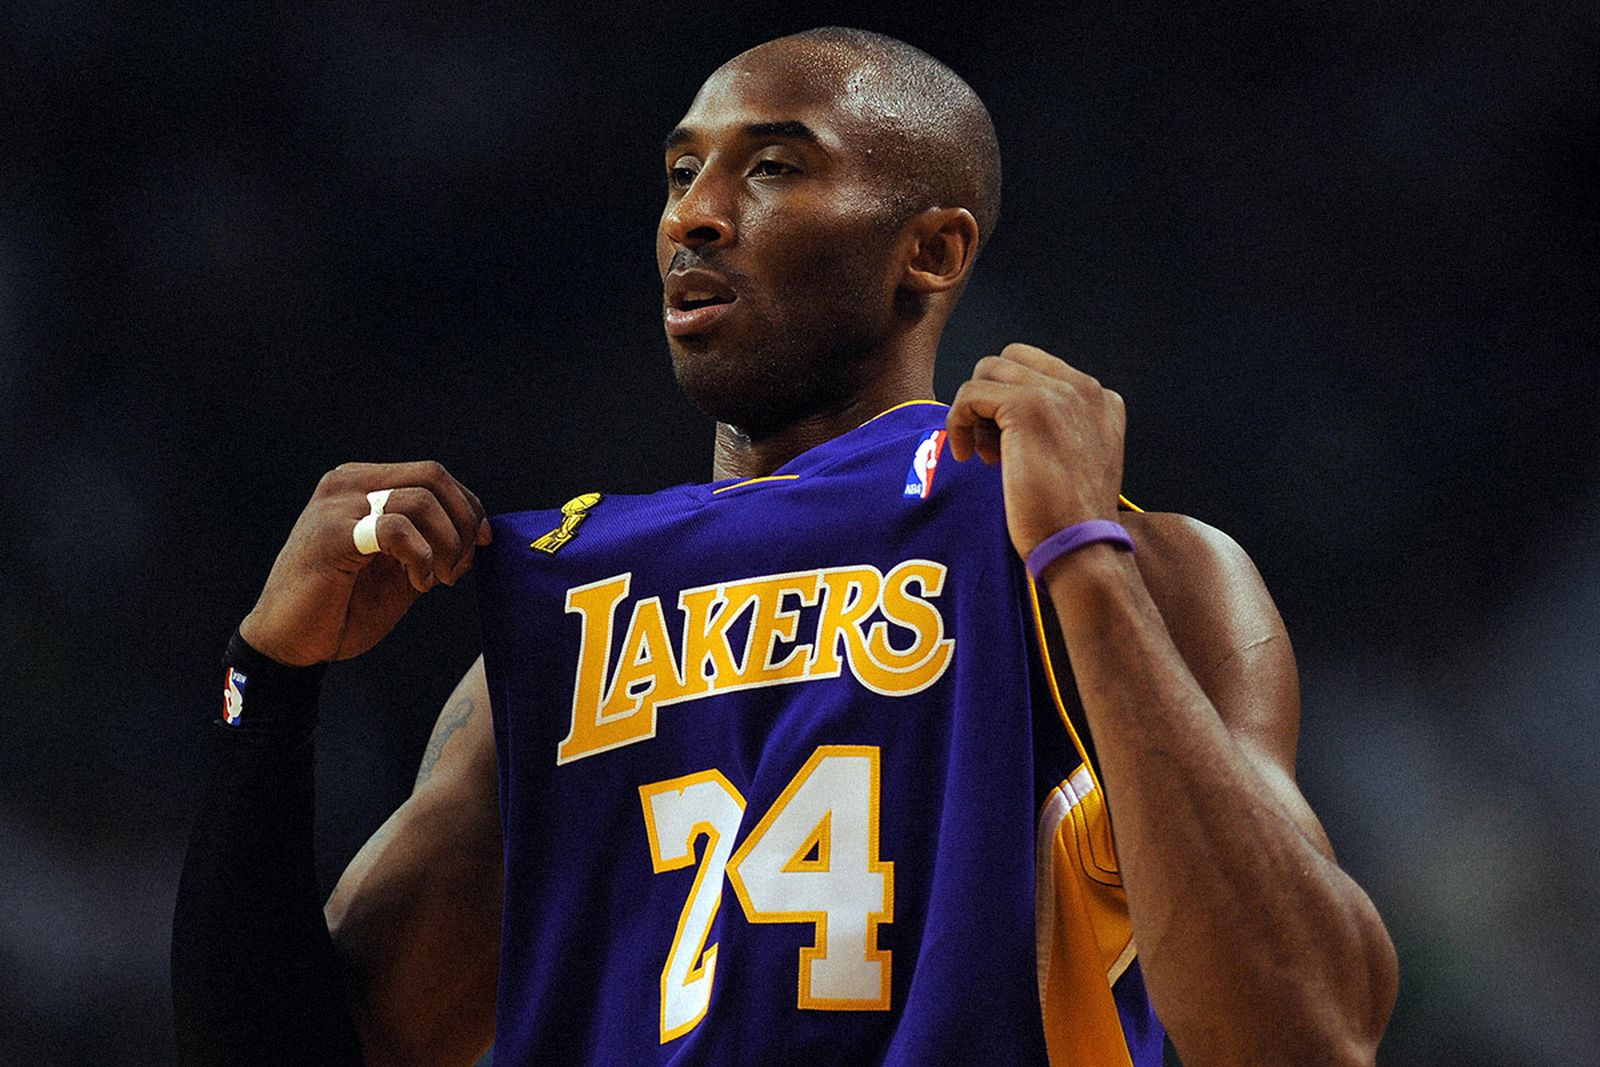 kobe-bryant-one-greatest-minds-ever-play-game-main02